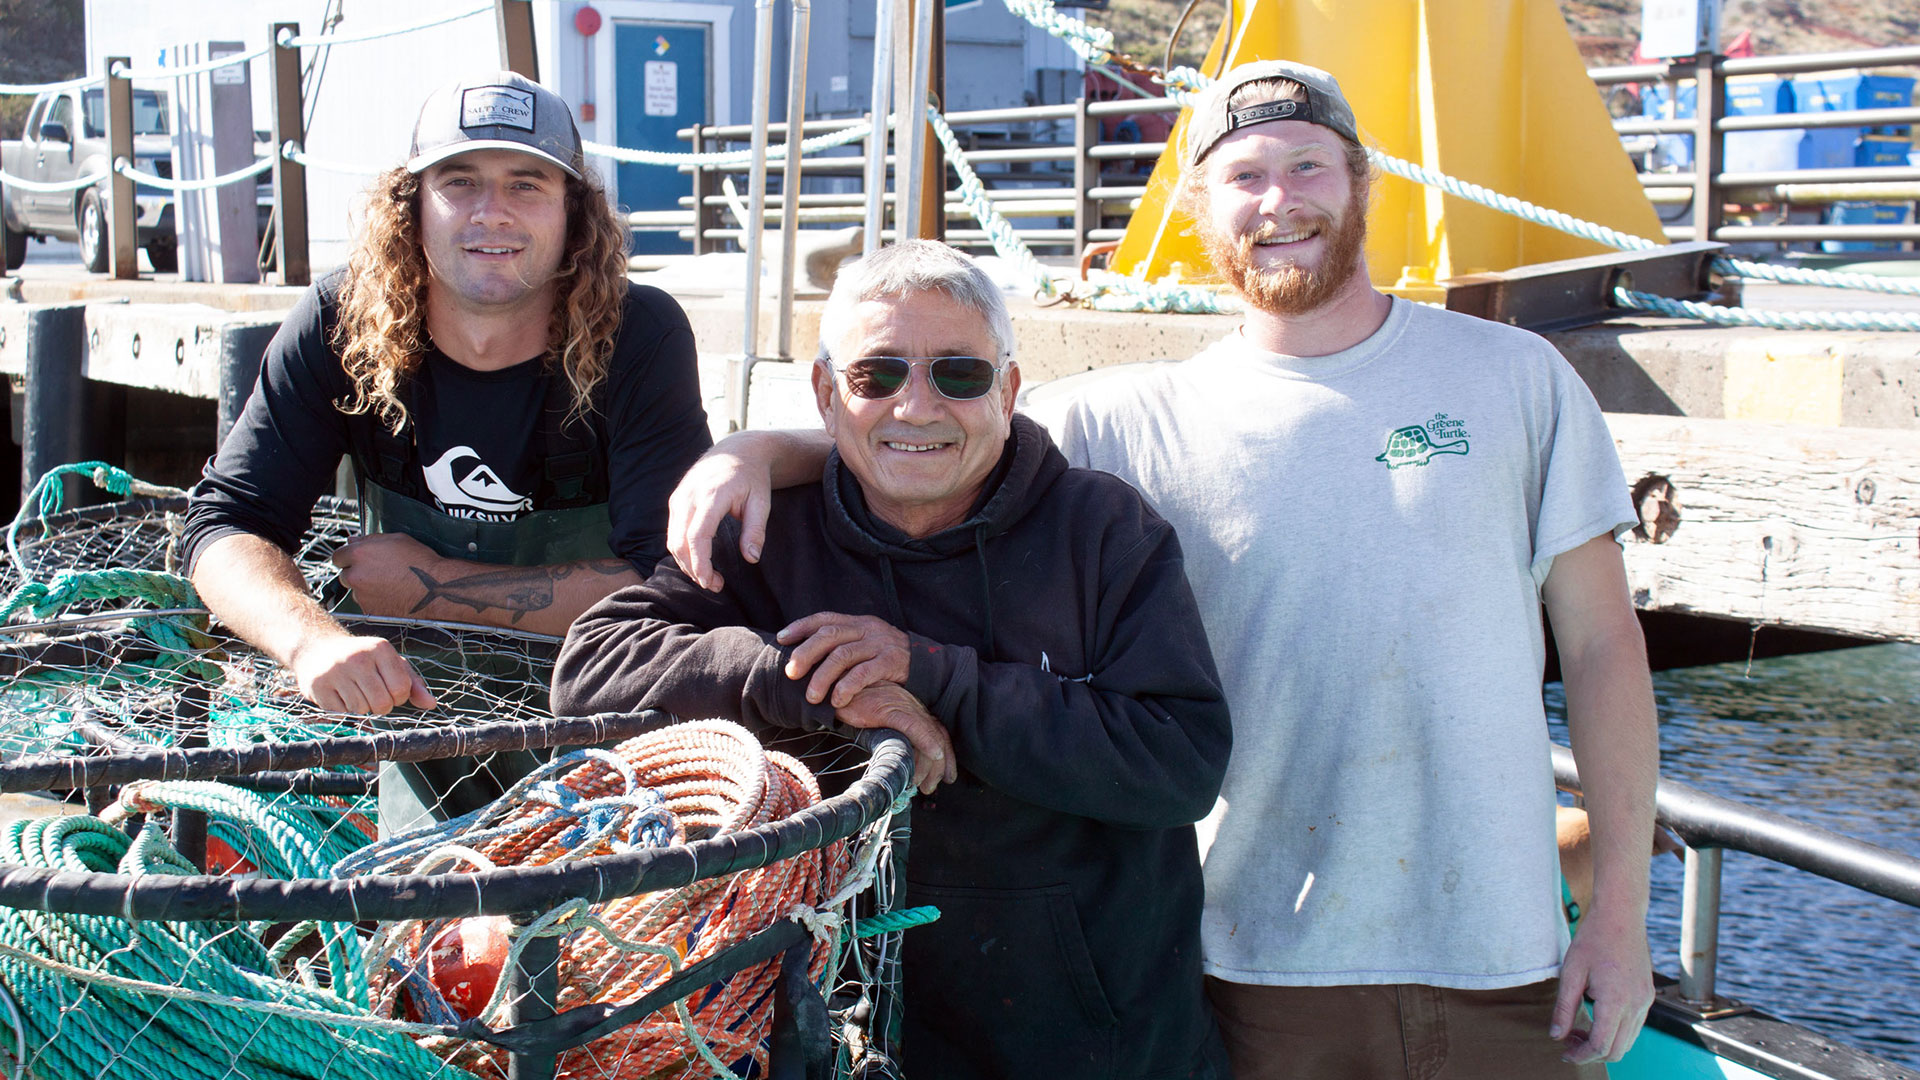 Three fisherman pose on a pier with their crab pots in the foreground.